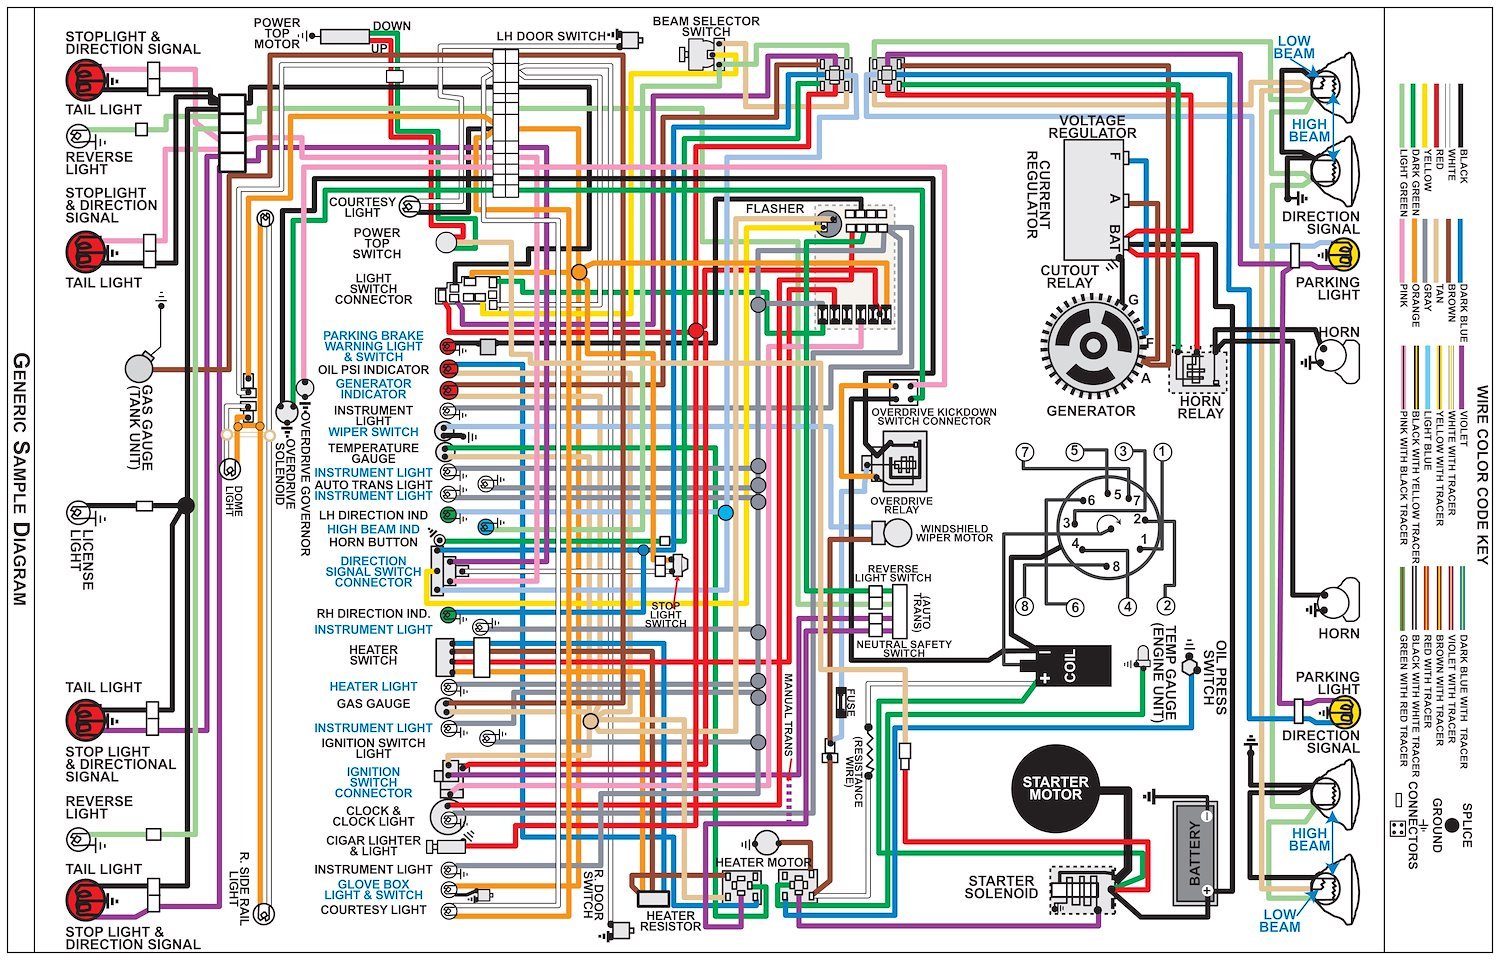 Wiring Diagram for 1969 Dodge Coronet Super Bee with Rallye Dash, 11 in x 17 in., Laminated